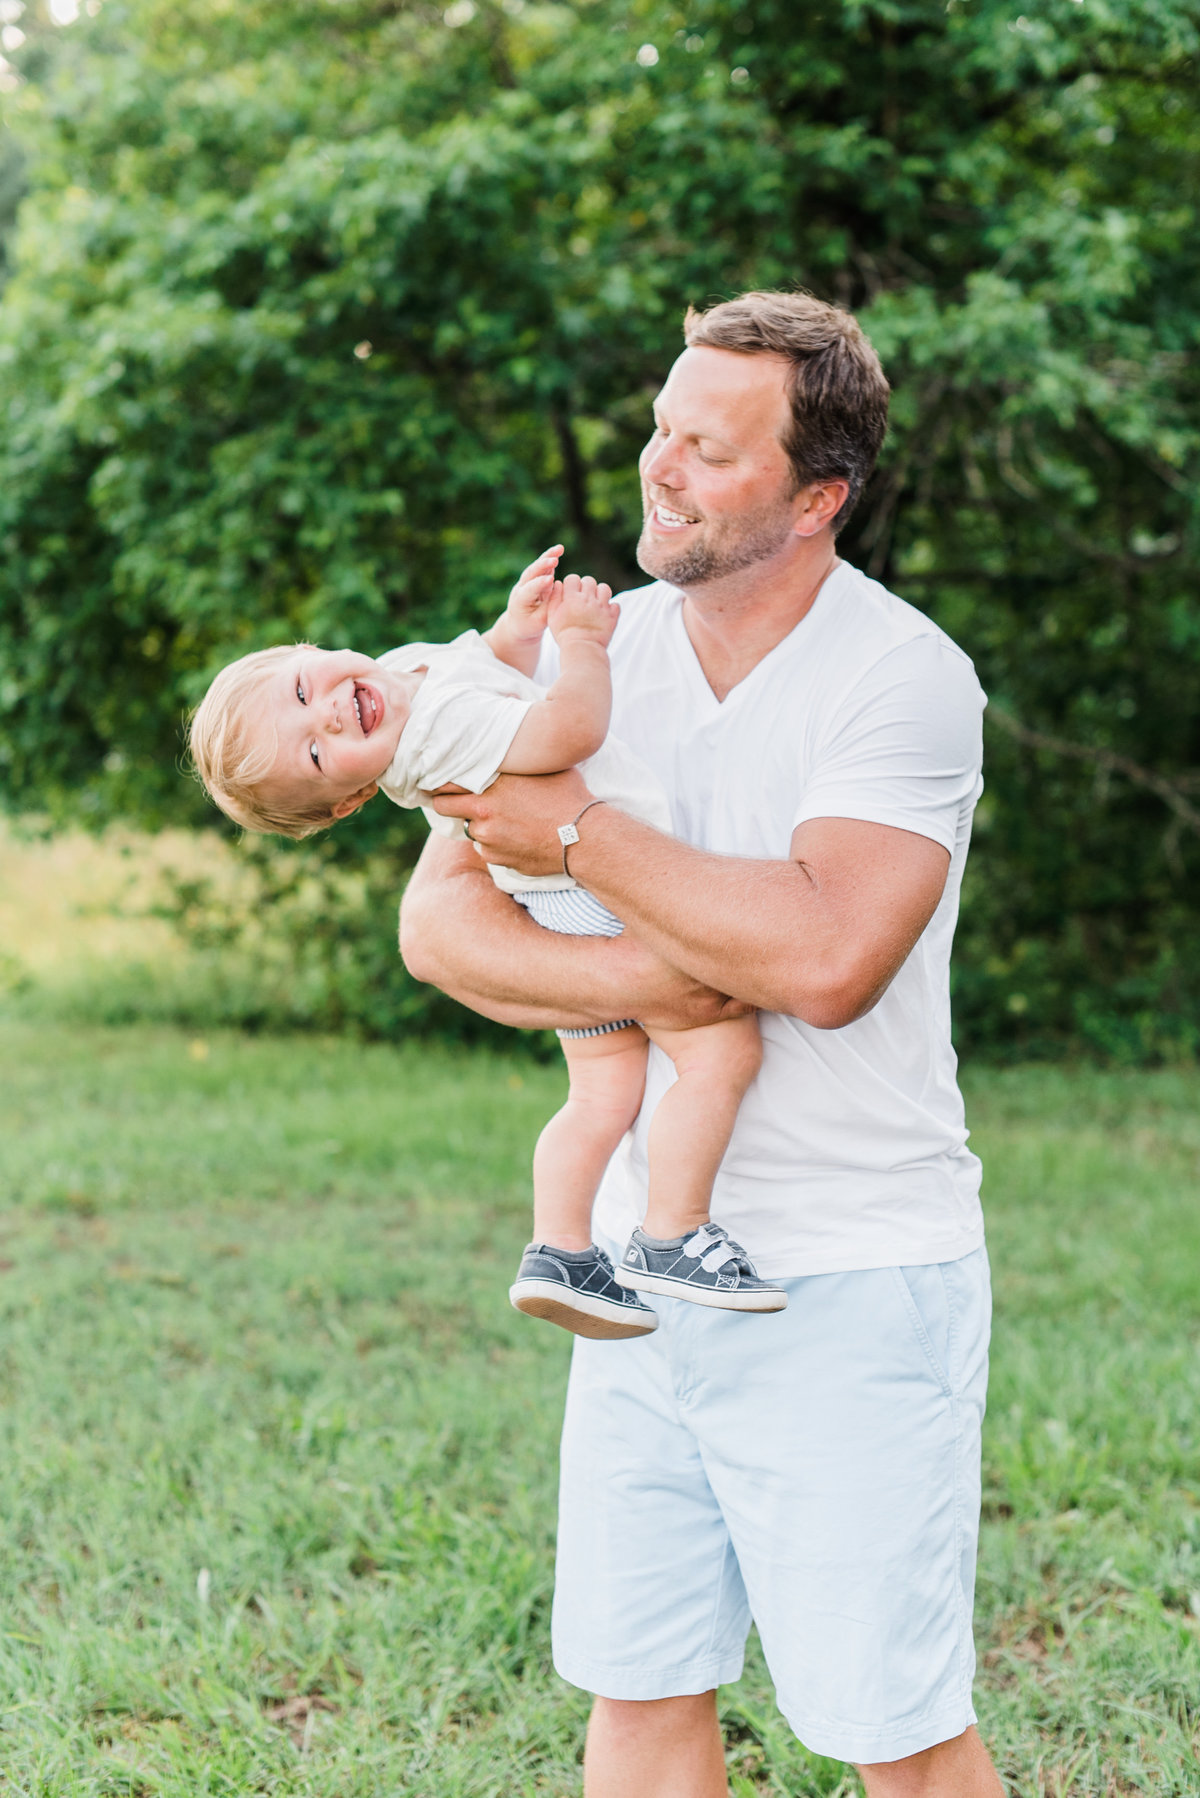 Dad plays with toddler son during a family photography session in Raleigh NC. Photographed by Raleigh NC family photographer A.J. Dunlap Photography.